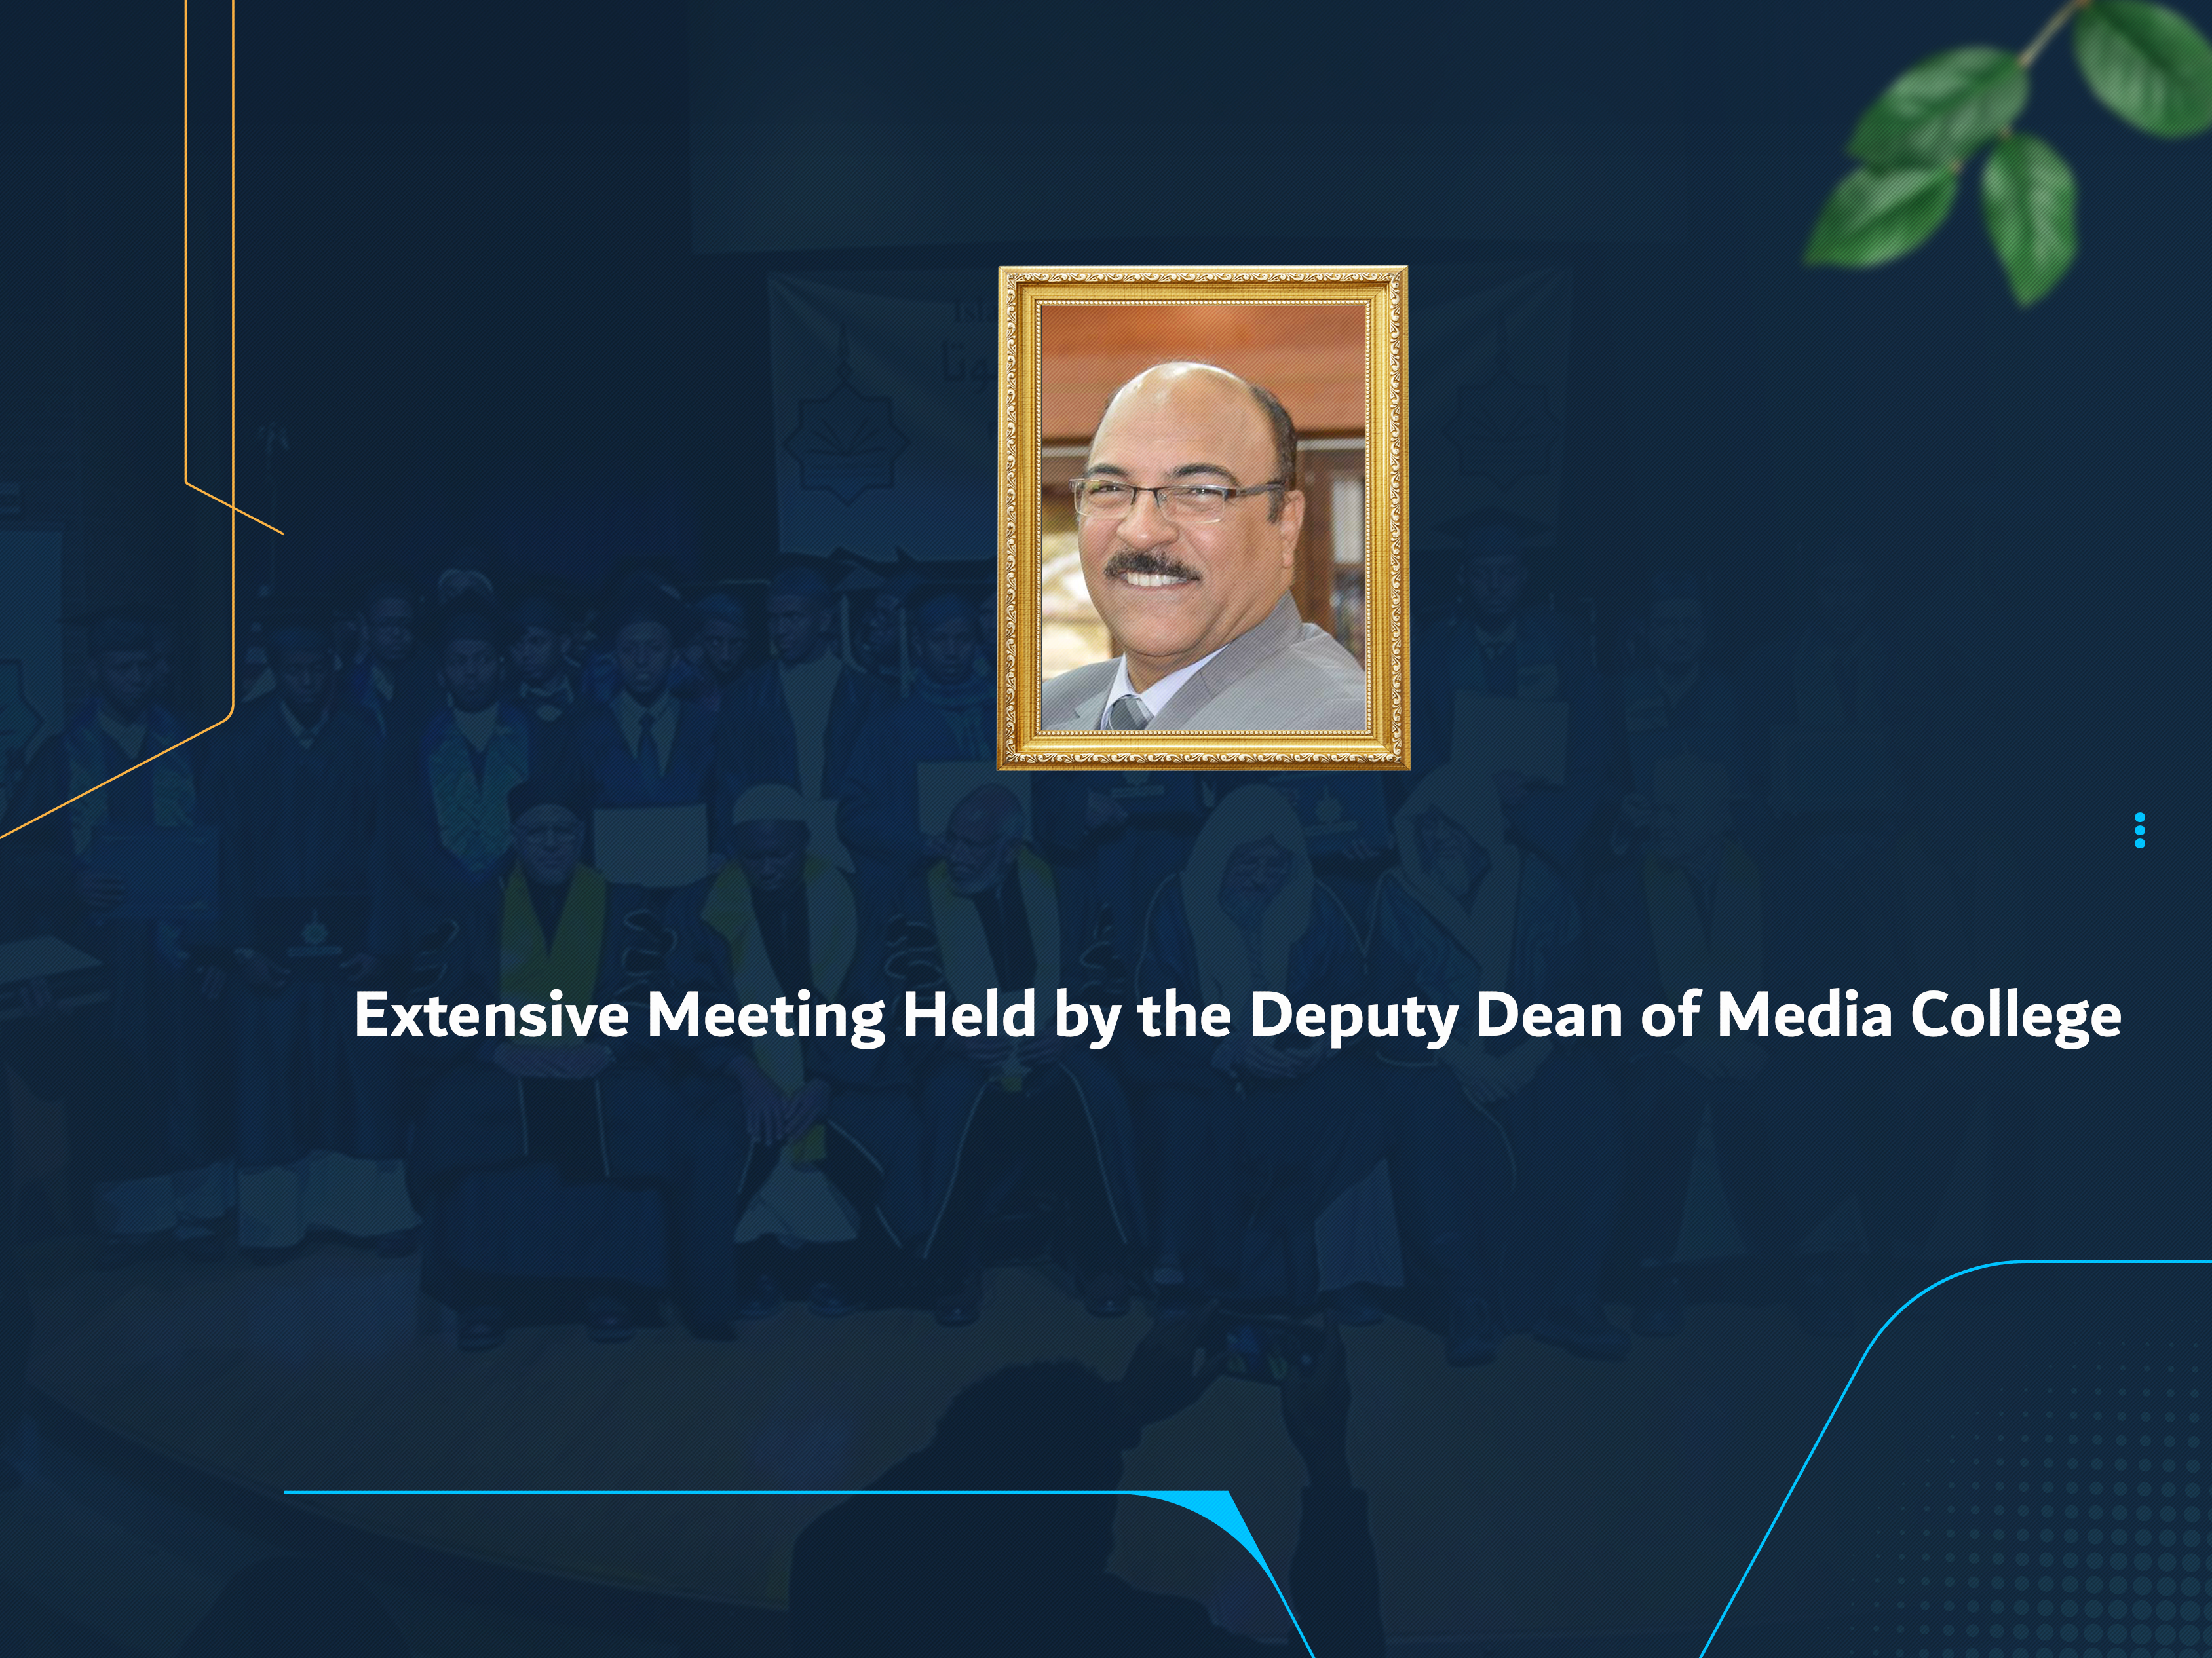 Extensive Meeting Held by the Deputy Dean of Media College